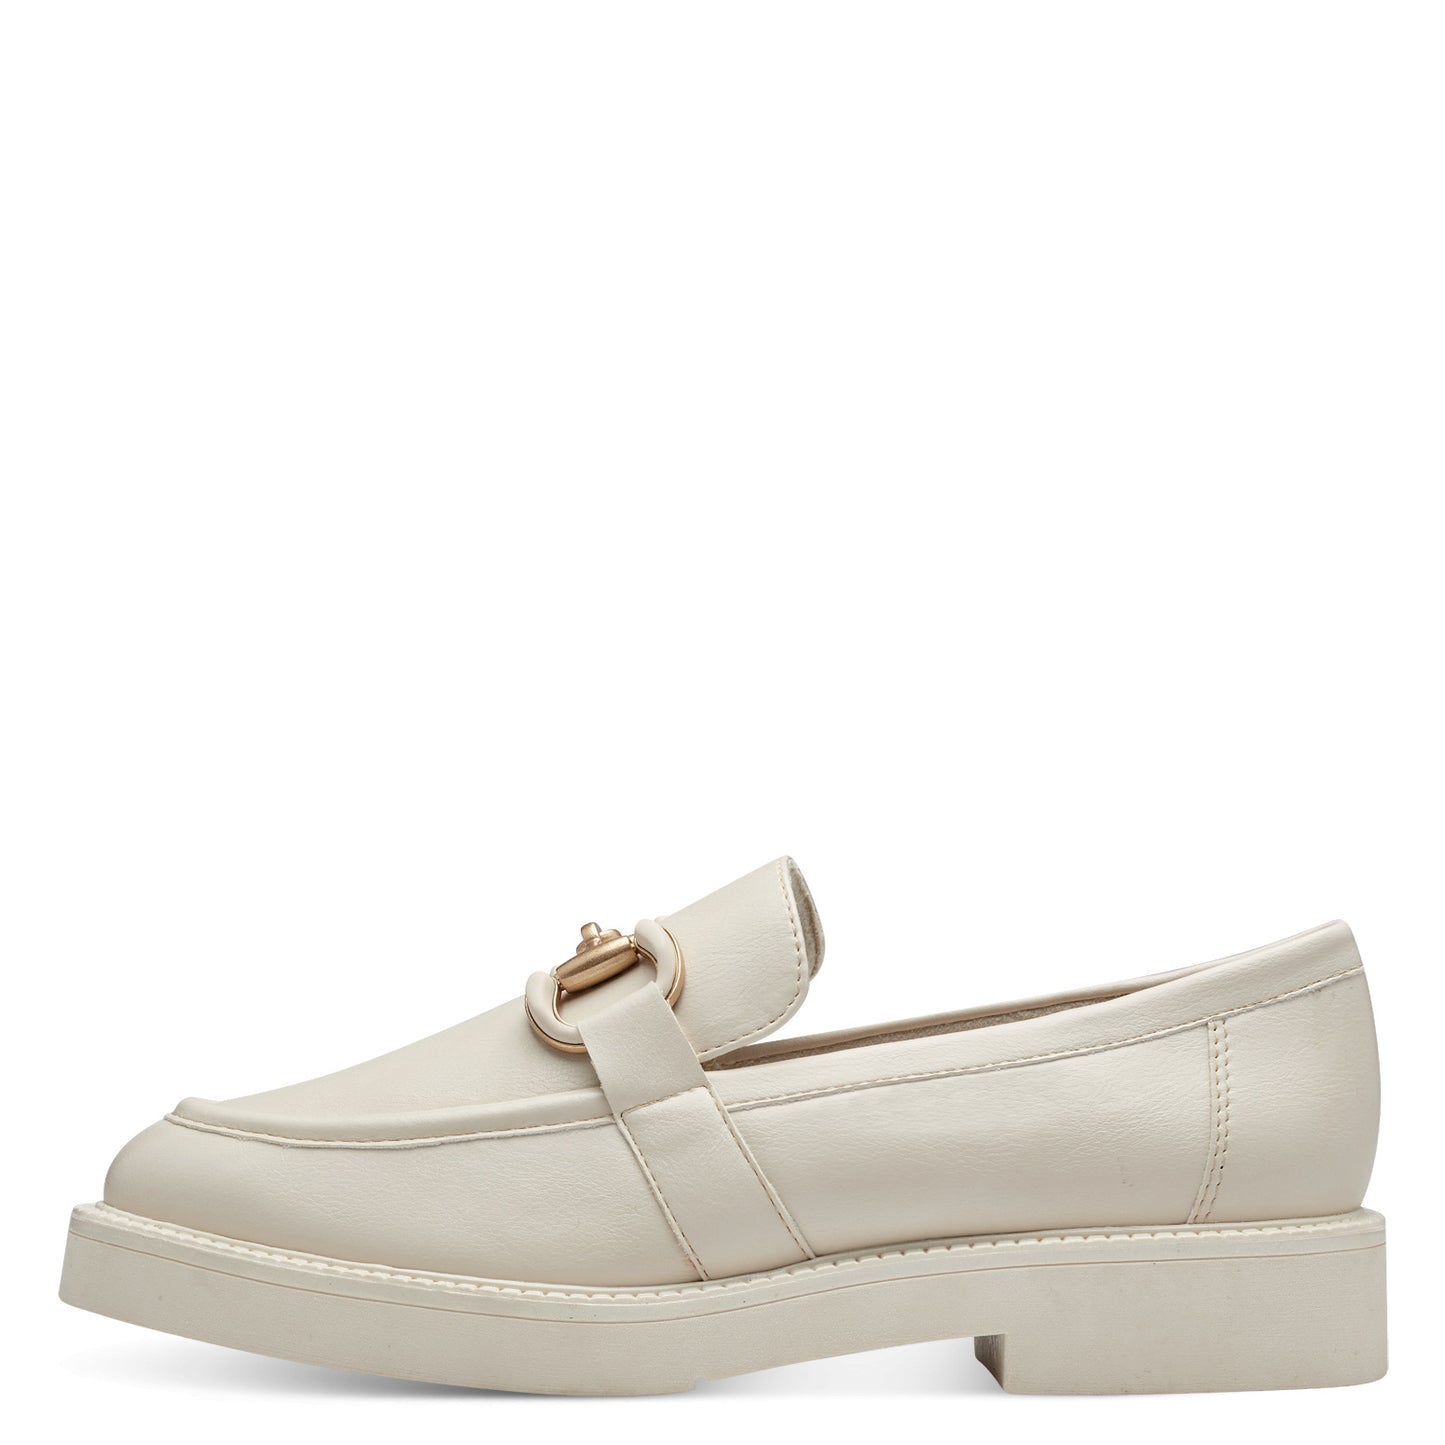 Marco Tozzi - Ladies Shoes Loafers Cream (2104)